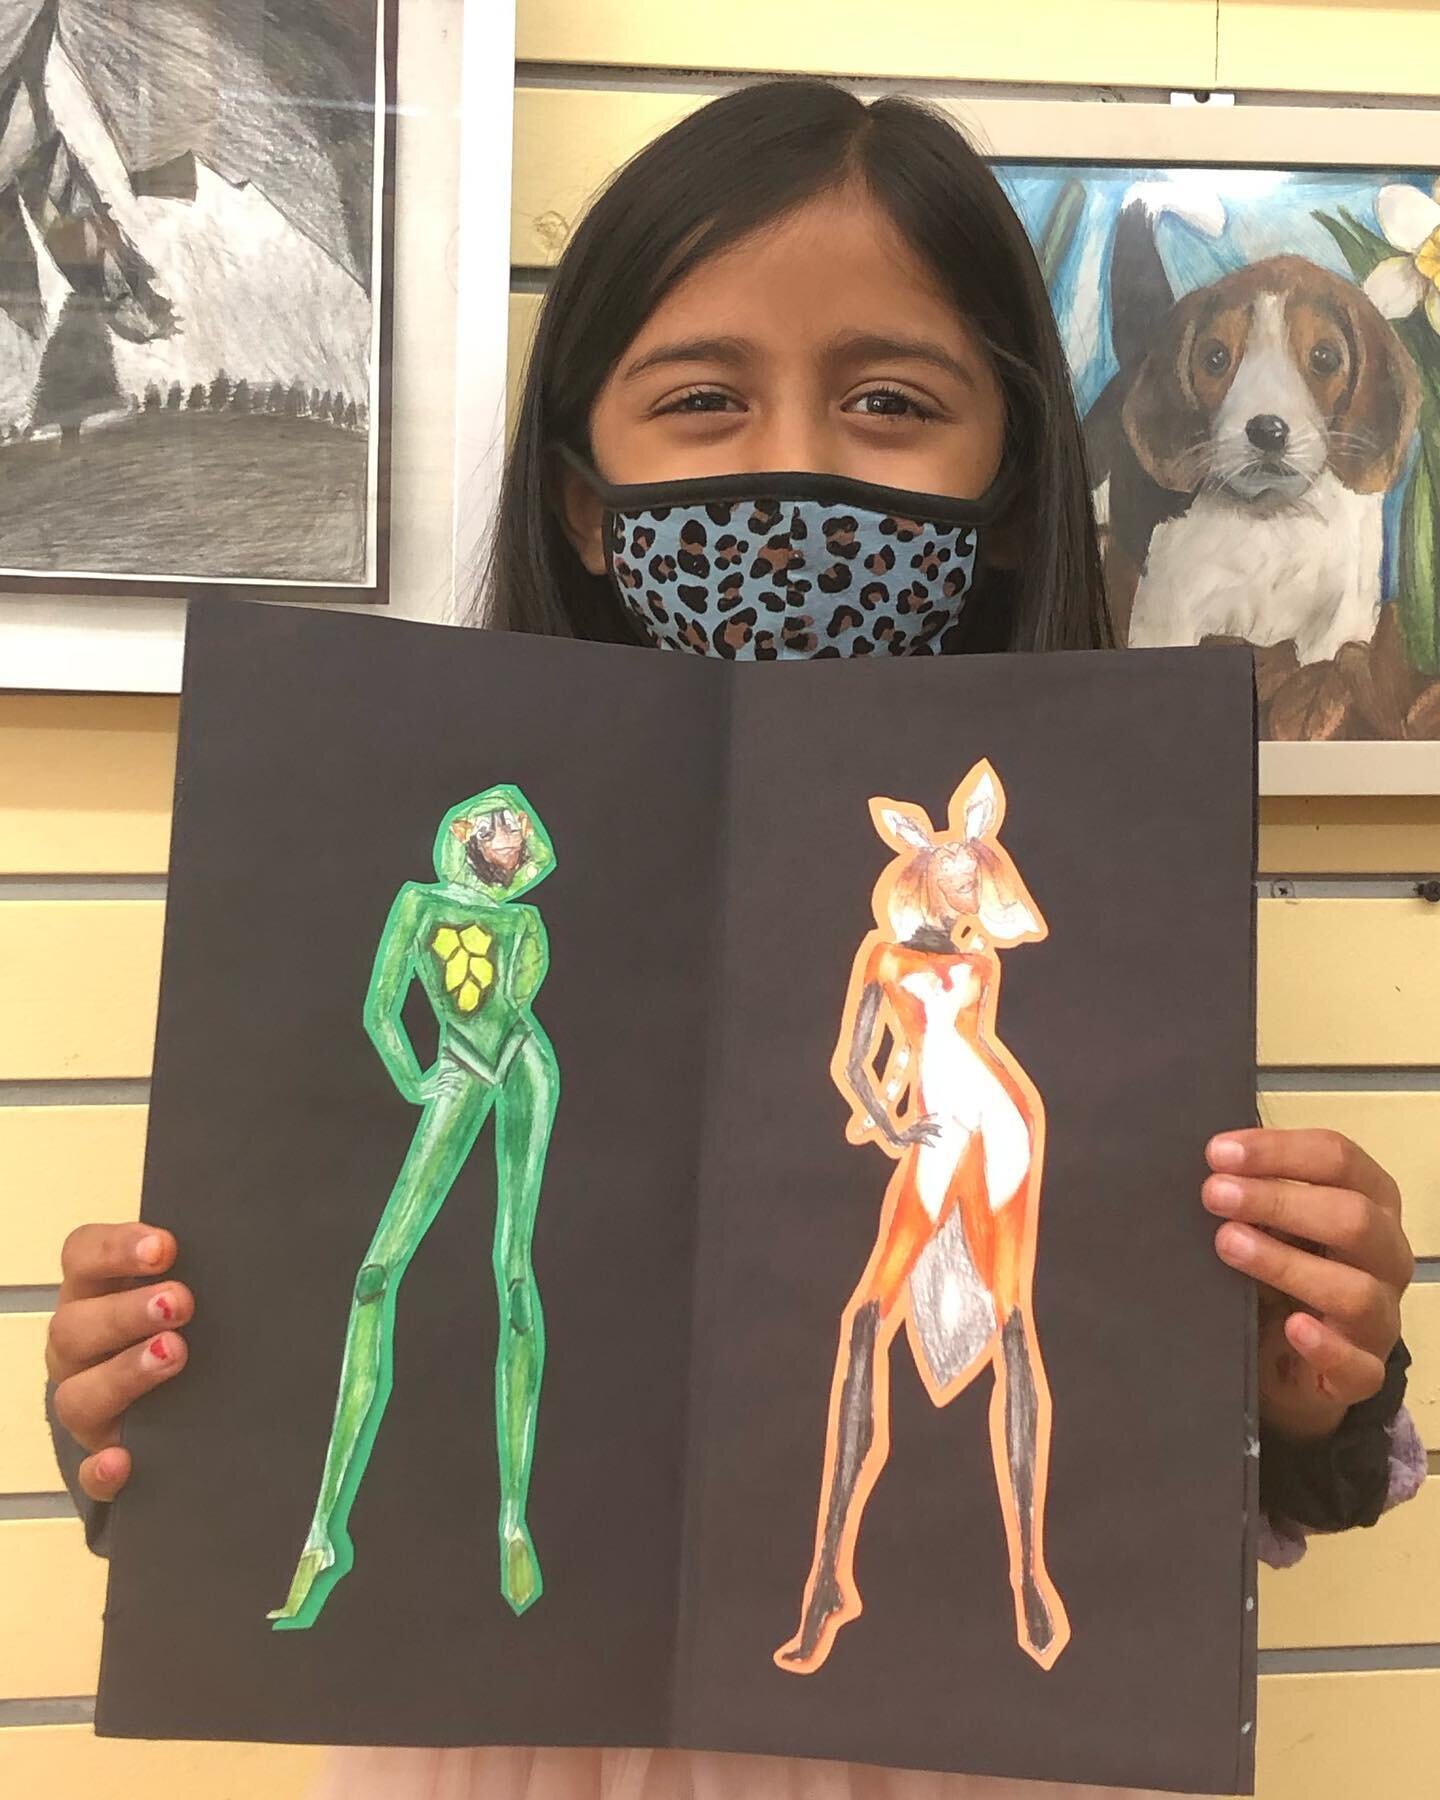 Extended Art Camp has been a blast! First photo is Riya and some of her superhero designs in her fashion illustration book. Second photo is a work in progress of Bianca’s story book of Ava the Dog and friends. Great job Bianca and Riya 👏